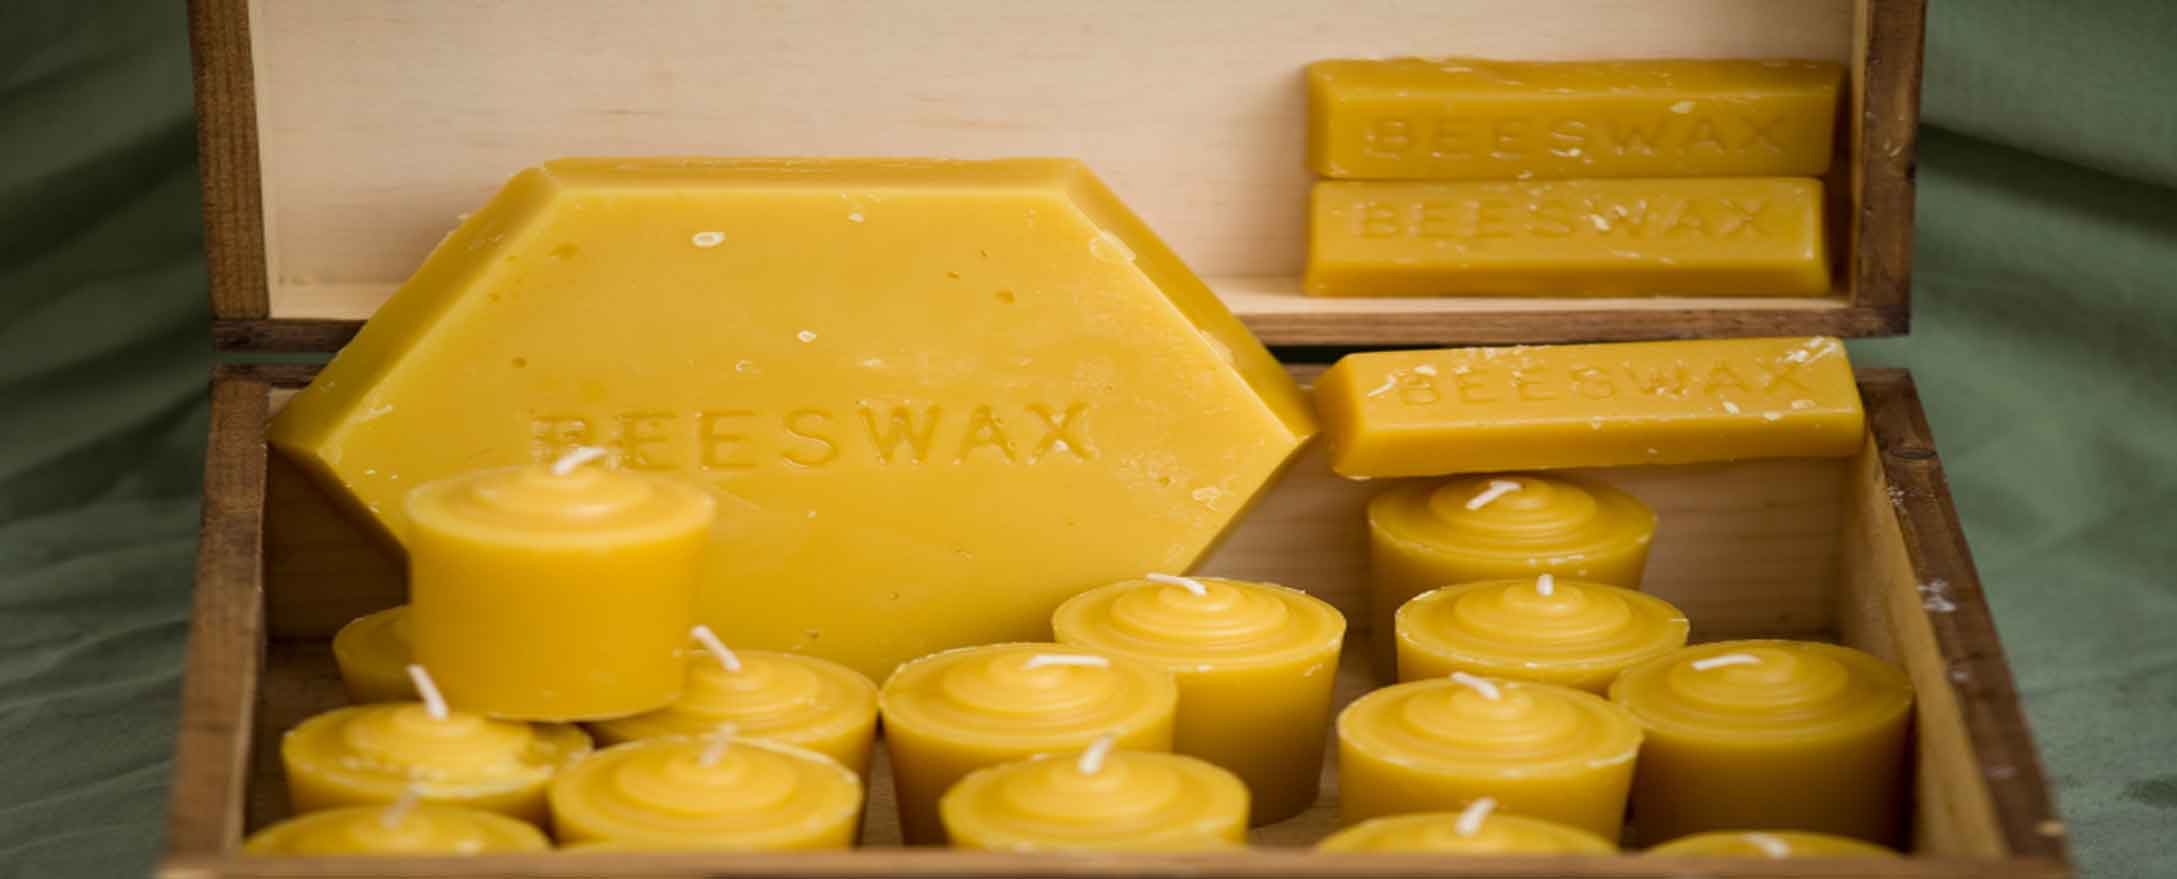 Beewax-used-to-make-products-like -candles